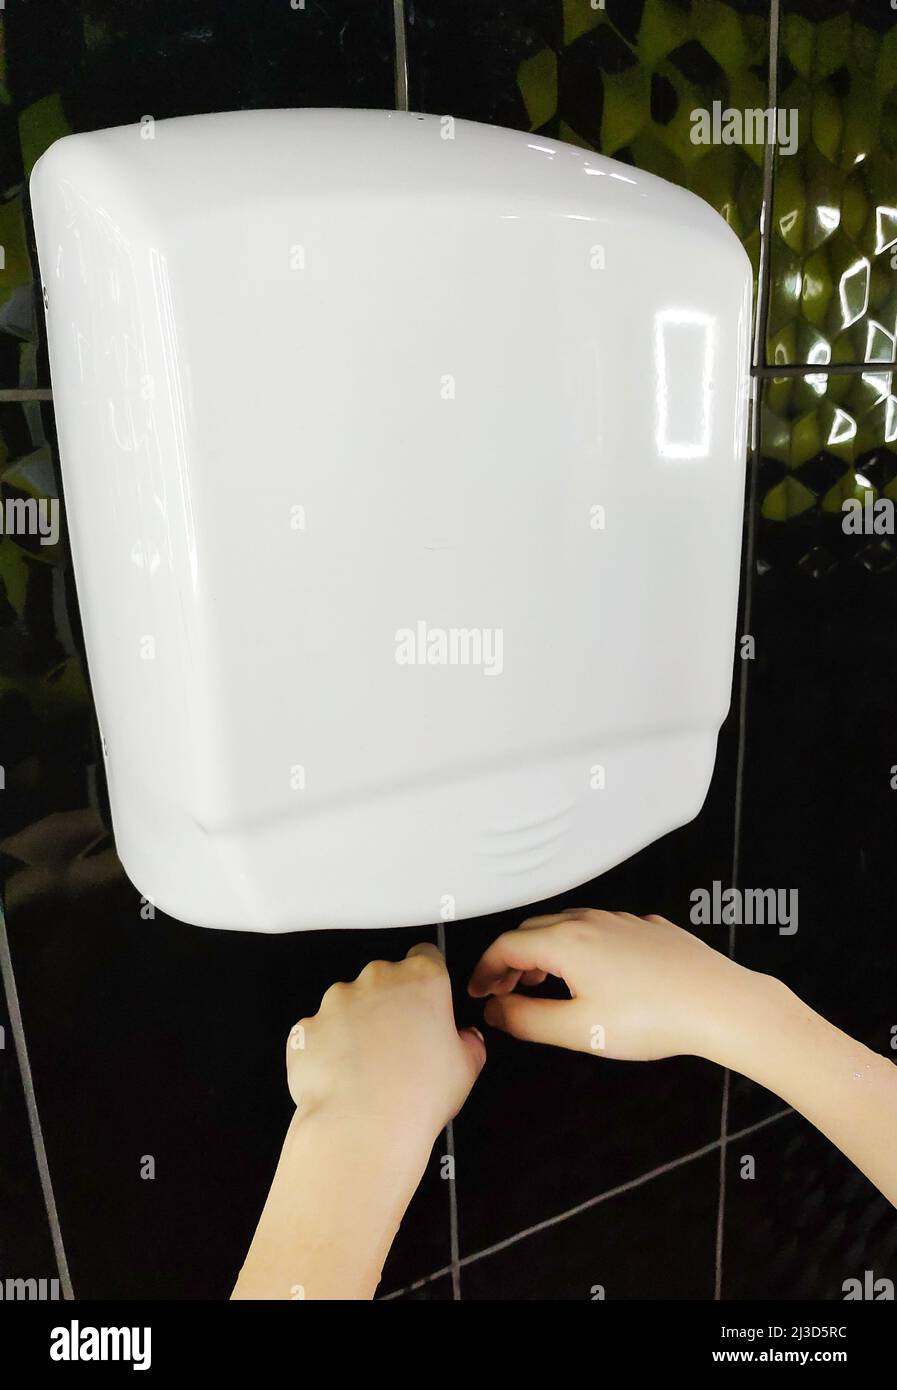 Air automatic hand dryer hangs on the wall and children's hands are dried under it Stock Photo